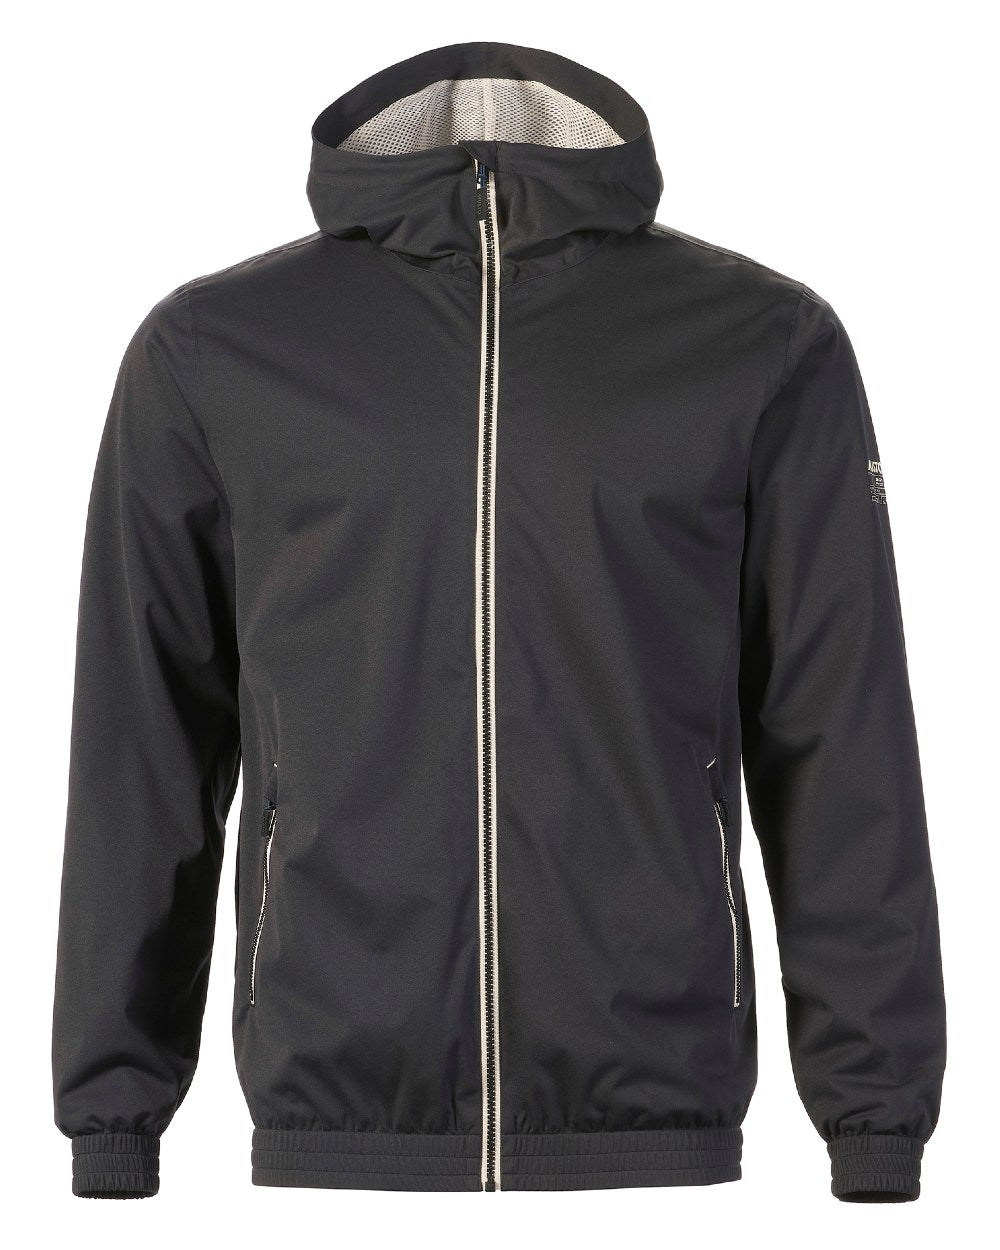 Black Coloured Musto Mens Active Rain Jacket On A White Background 